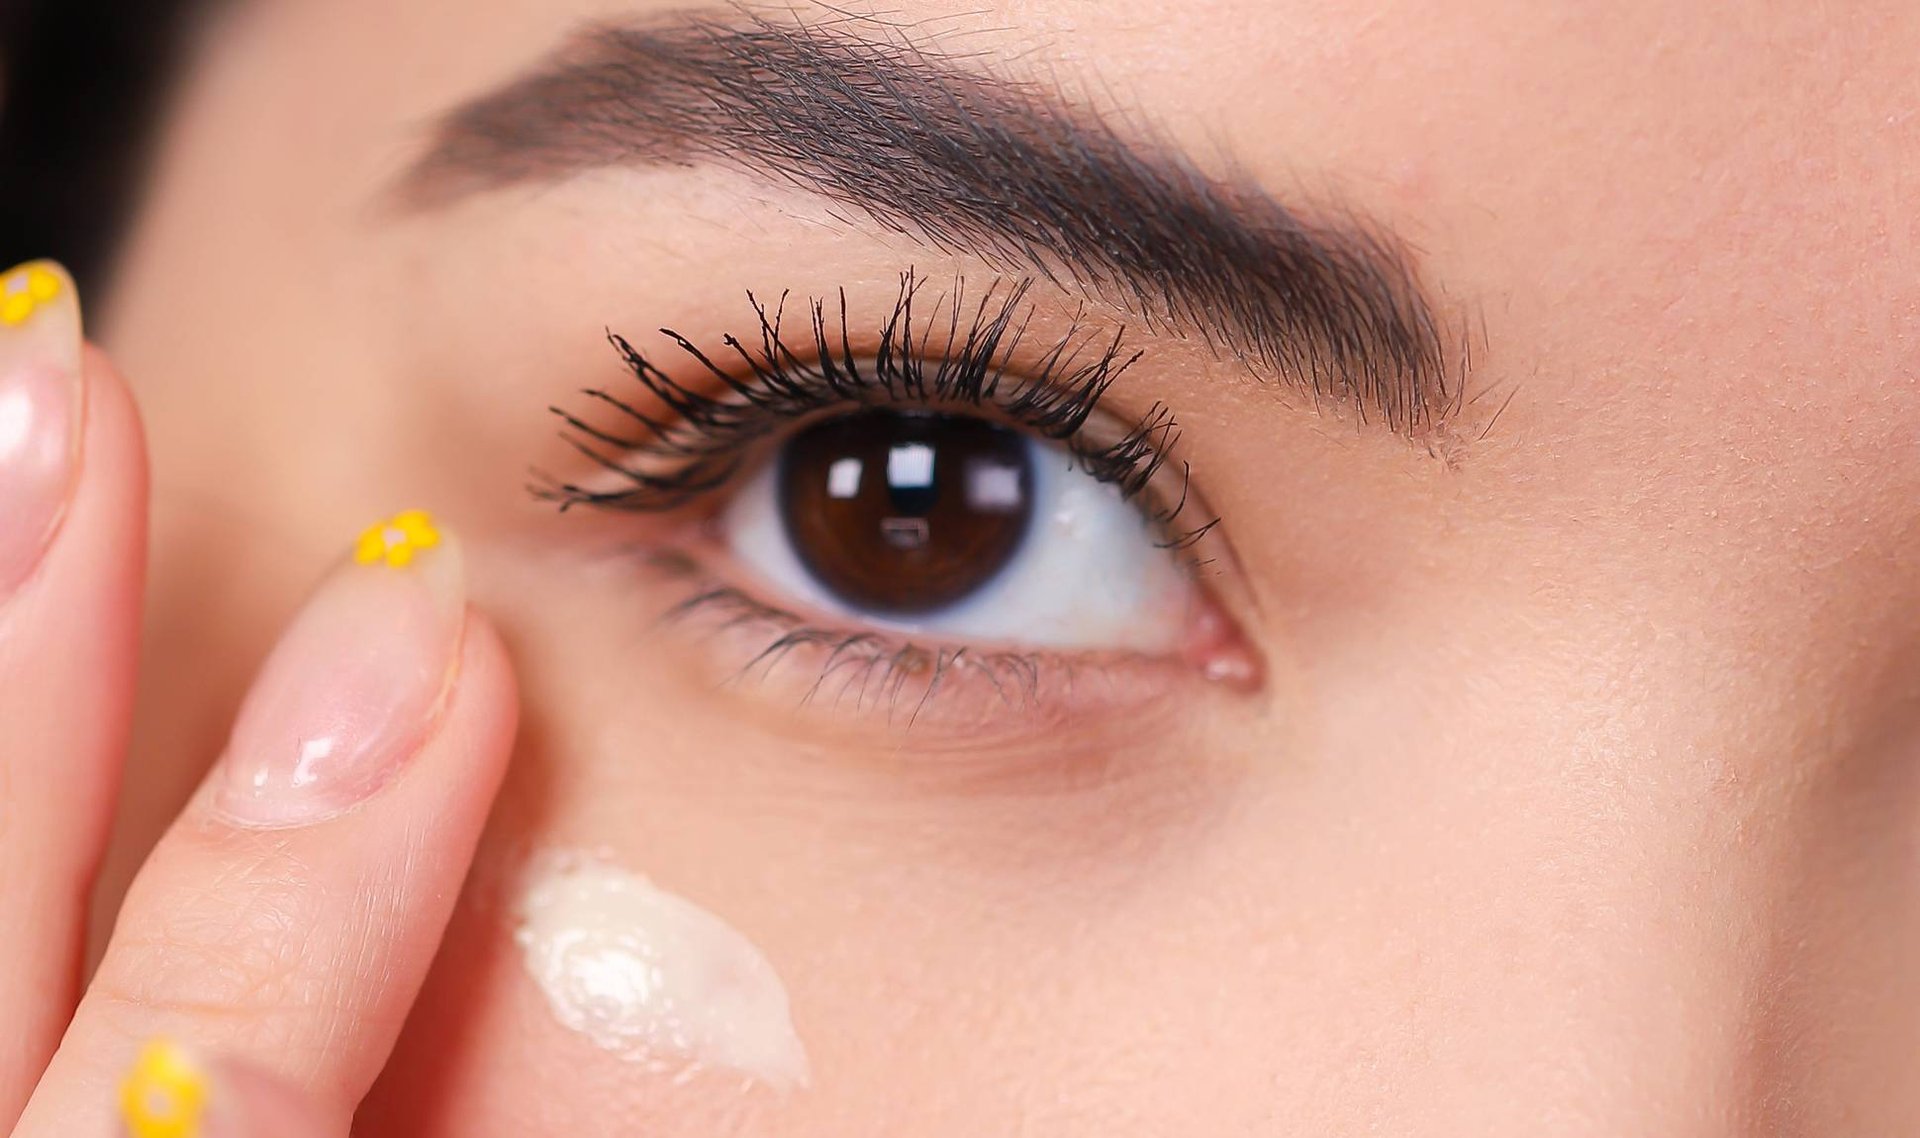 The Top 5 Ingredients You Should Look For in an Eye Cream